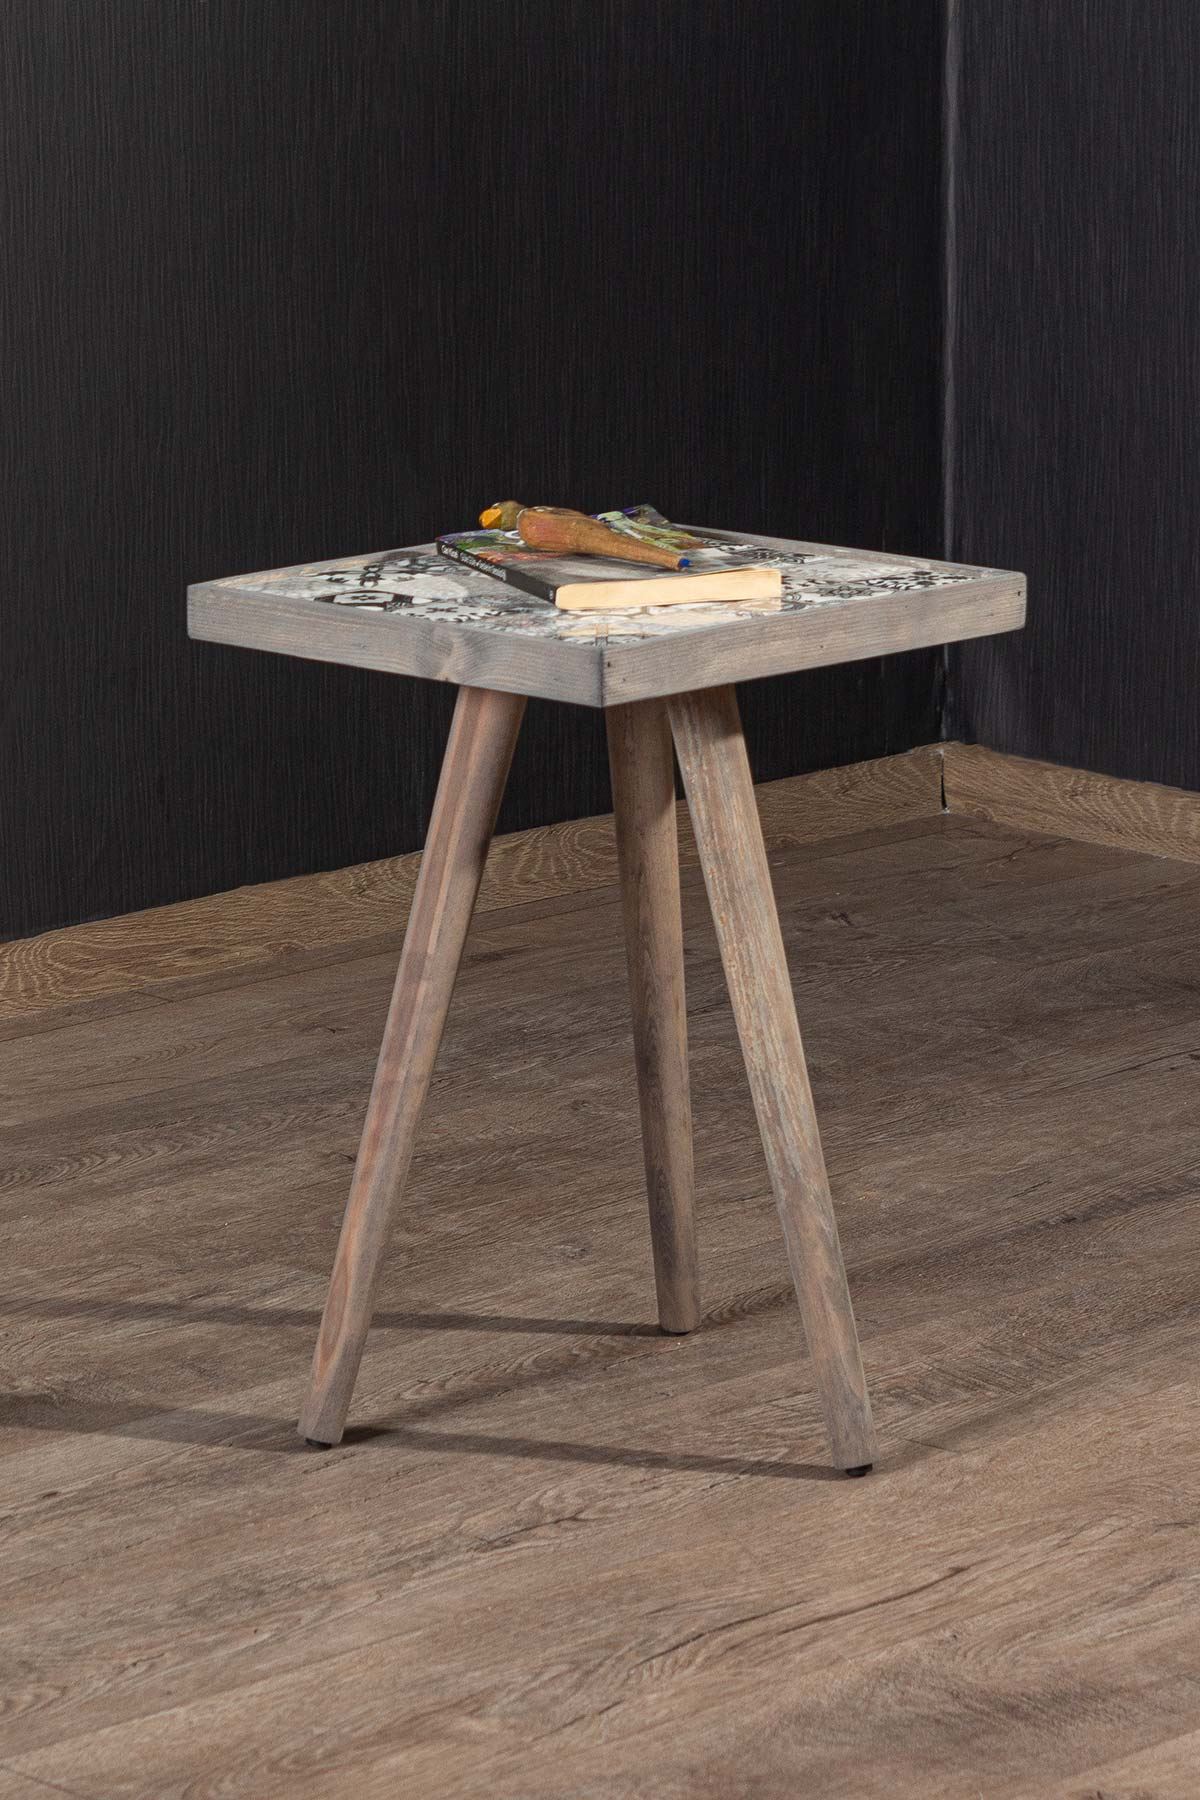 Bofigo Wooden Tile Center Table Wooden Solid Wood Table 32x32 Cm Grey